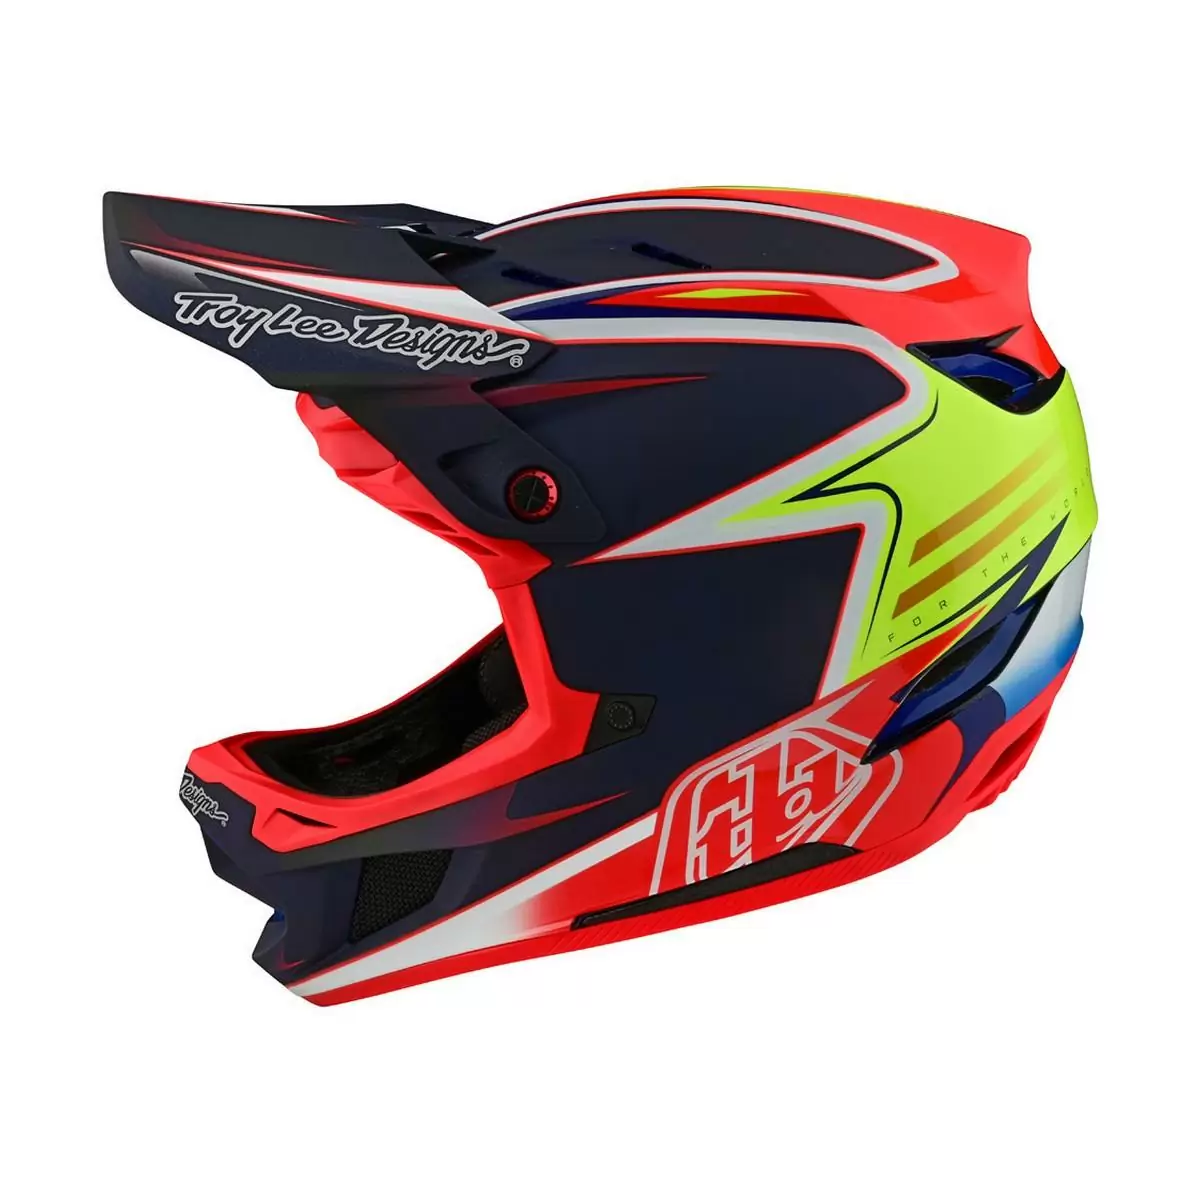 Full Face MTB Helmet D4 MIPS TeXtreme Carbon Stealth Black/Red Size S (55-56cm) - image